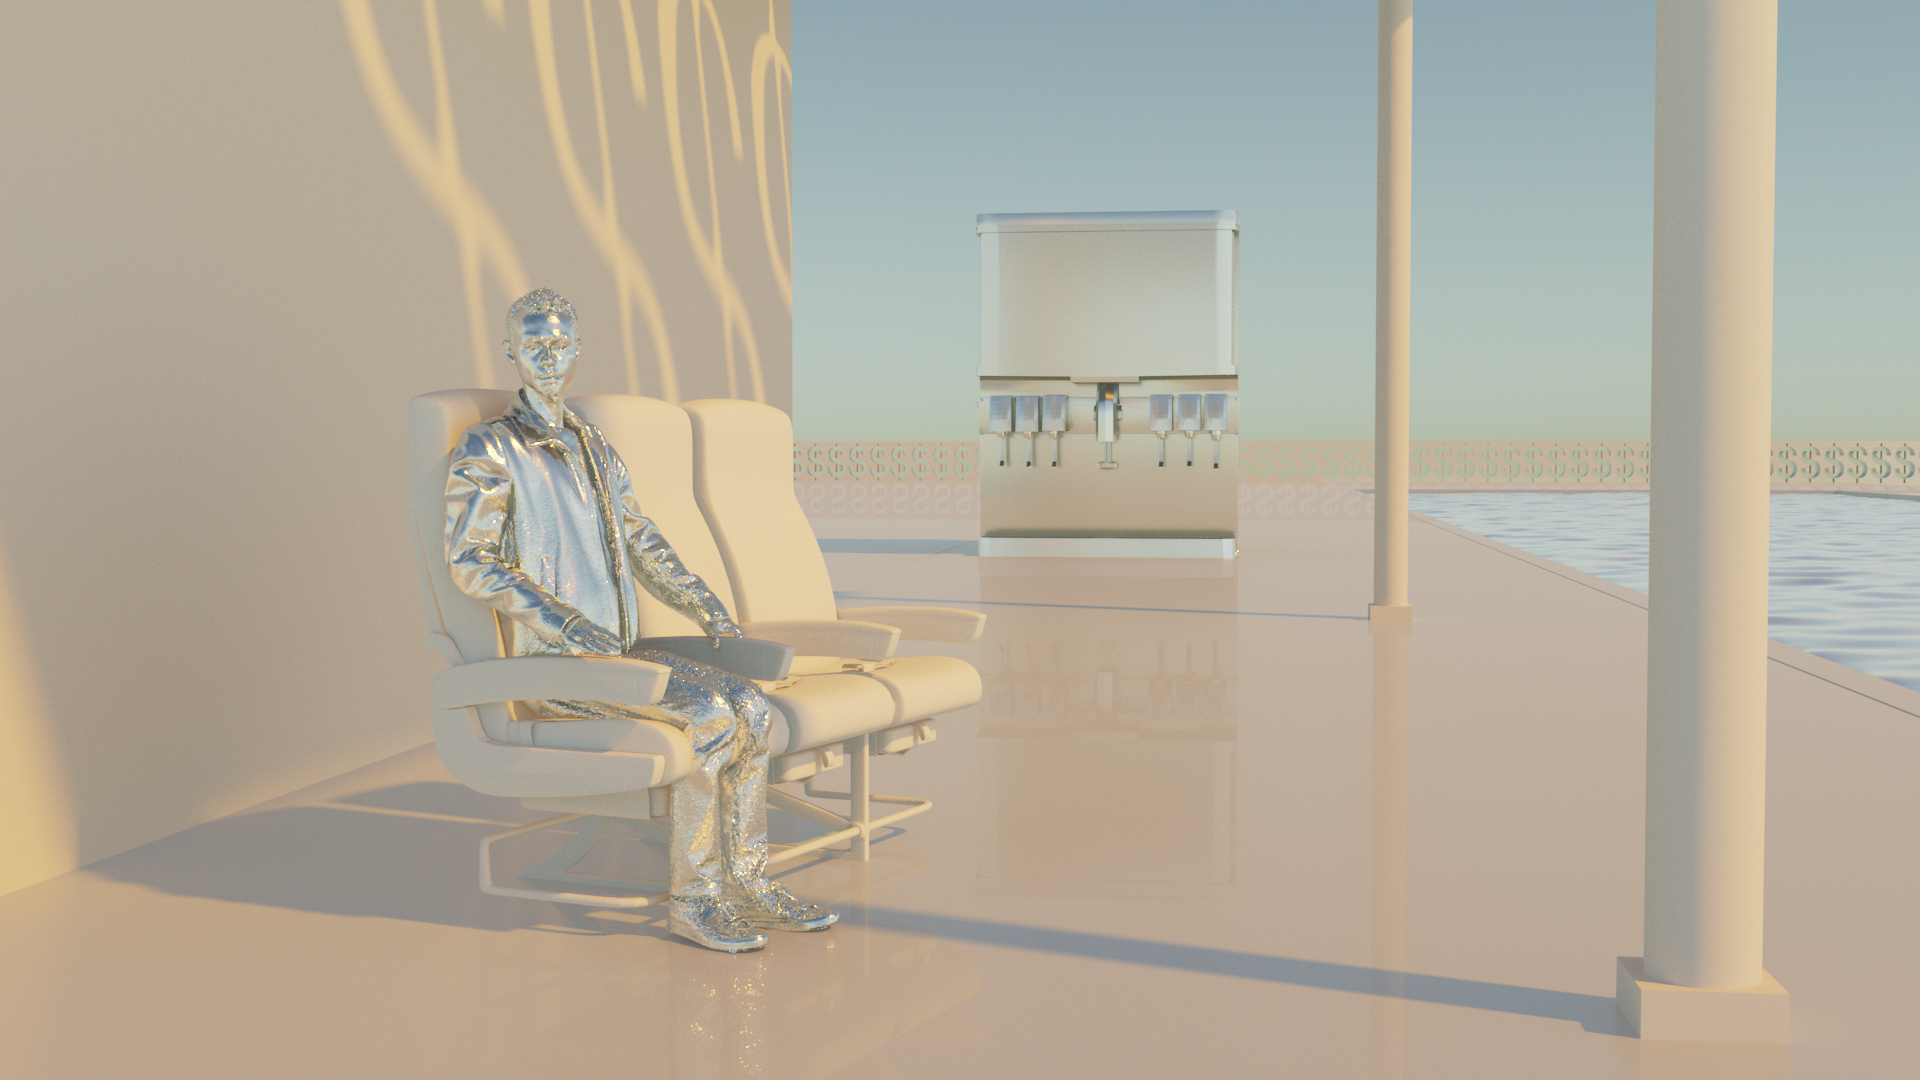 3d rendered scene of a person sitting on a chair in an exterior-like scene